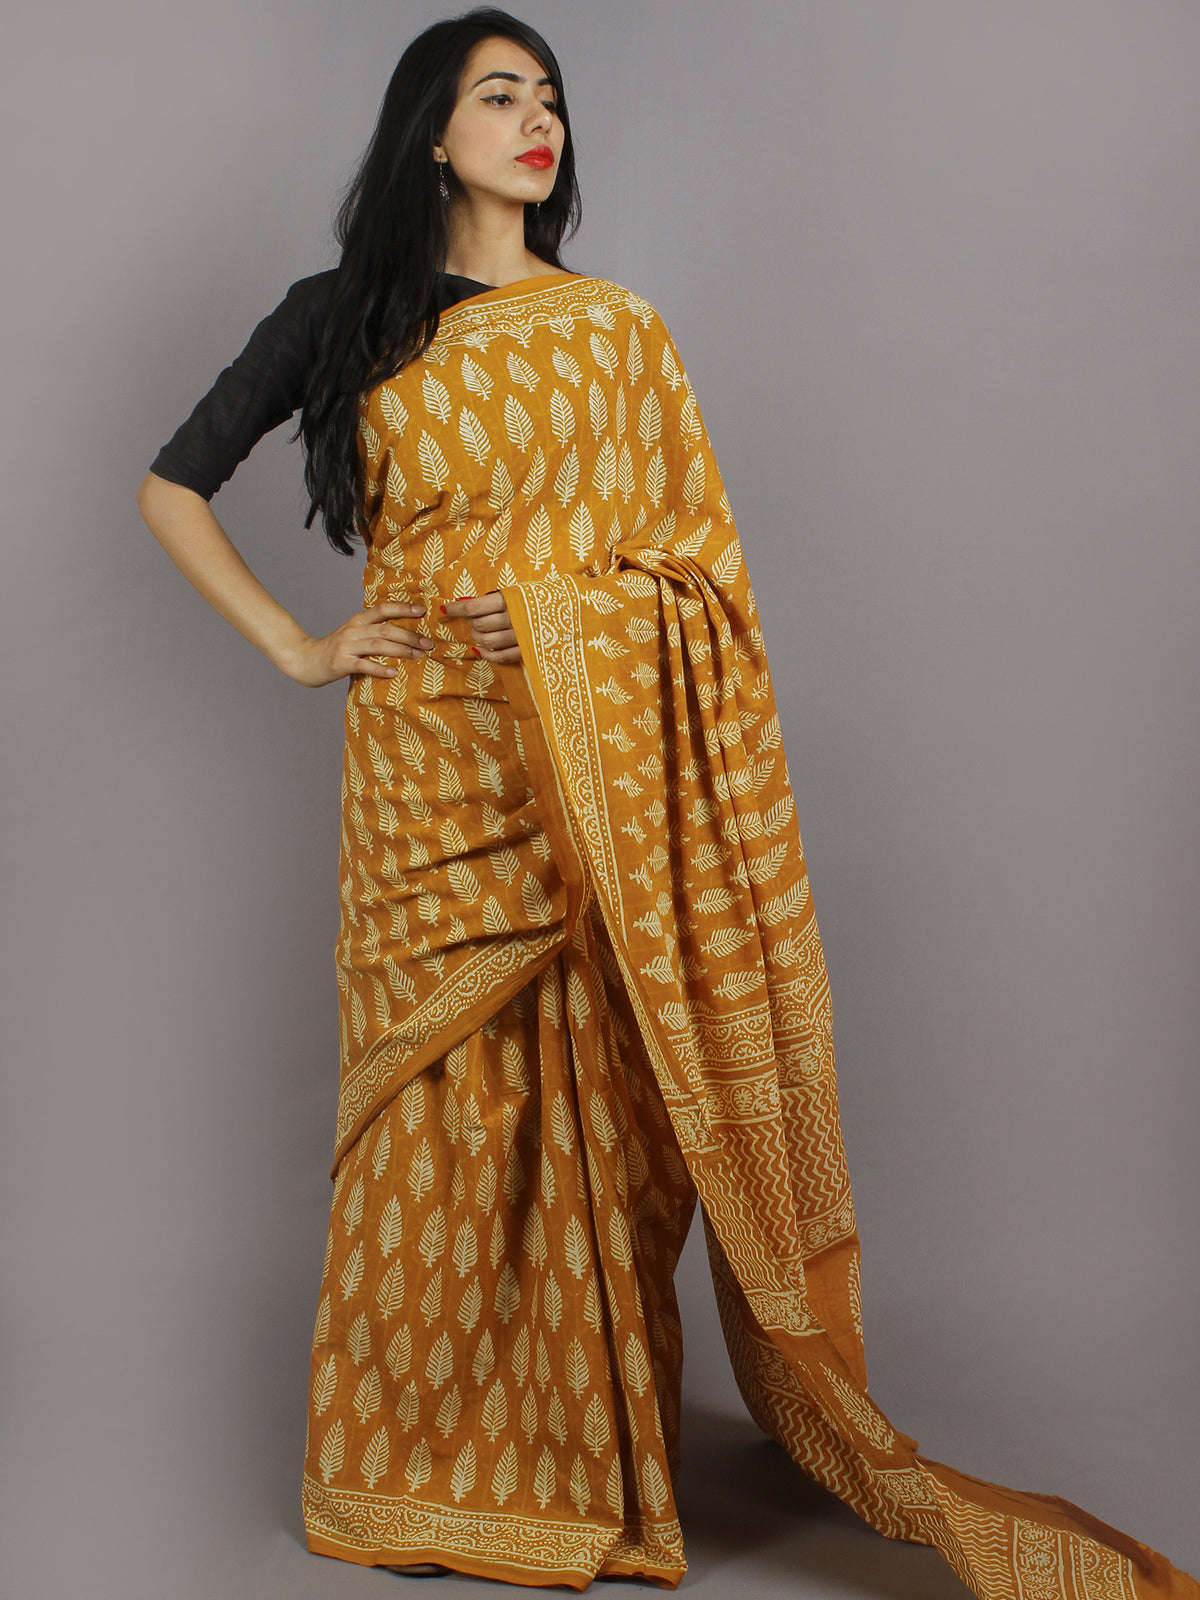 Mustard Yellow Ivory Hand Block Printed in Natural Colors Cotton Mul Saree - S031701229